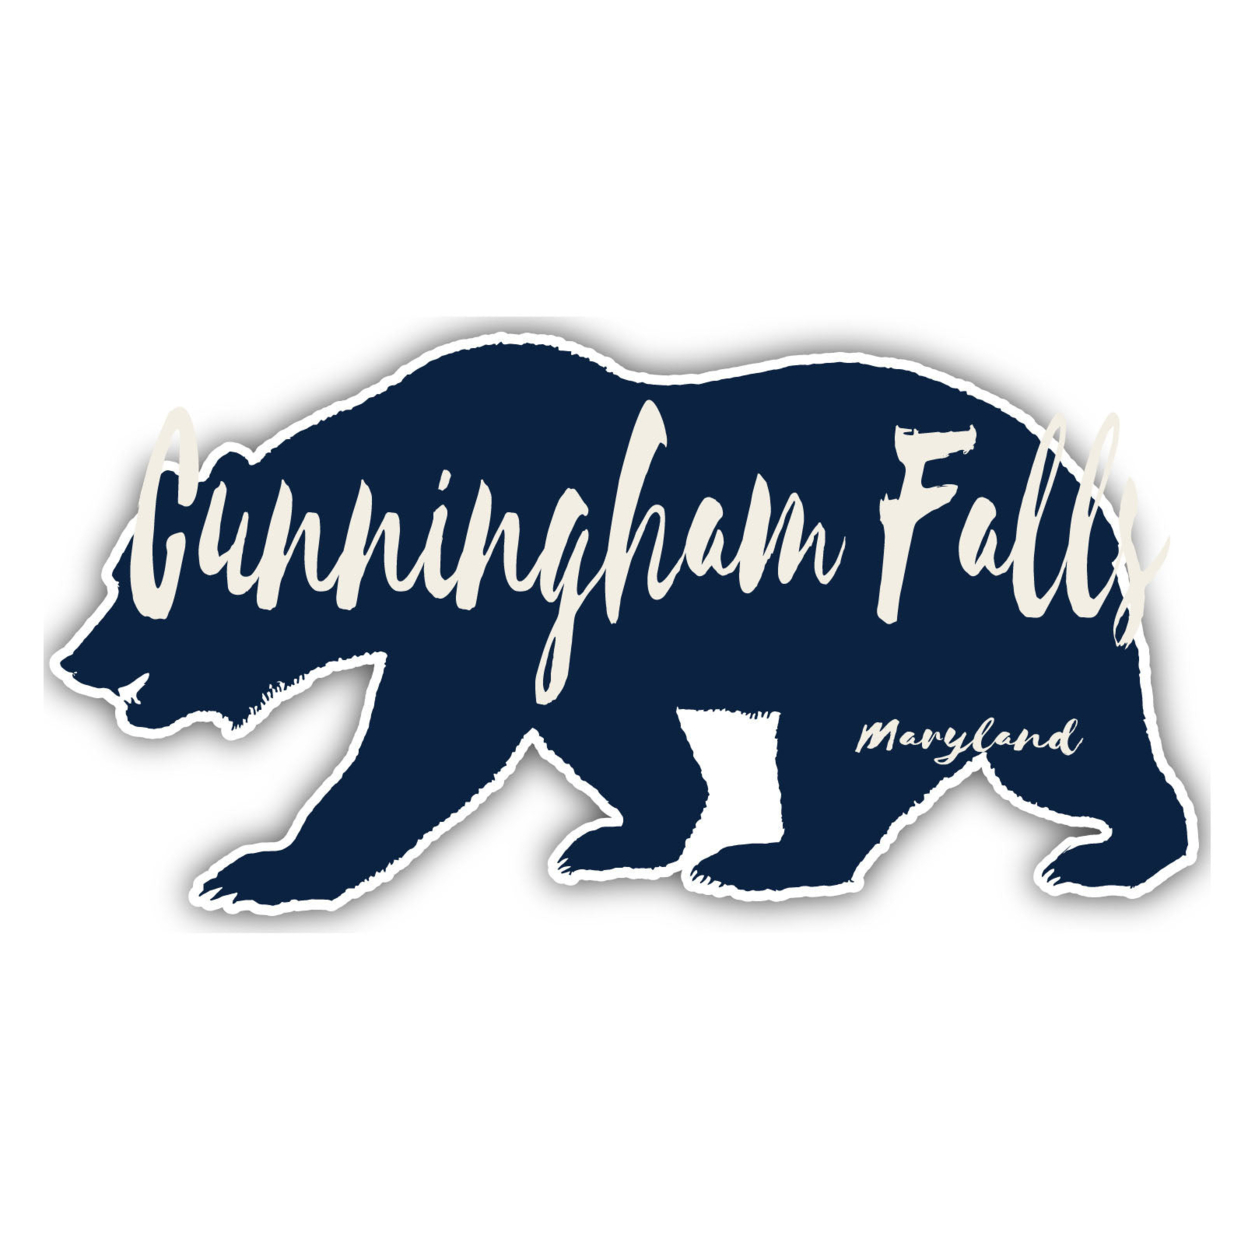 Cunningham Falls Maryland Souvenir Decorative Stickers (Choose Theme And Size) - 4-Pack, 8-Inch, Bear